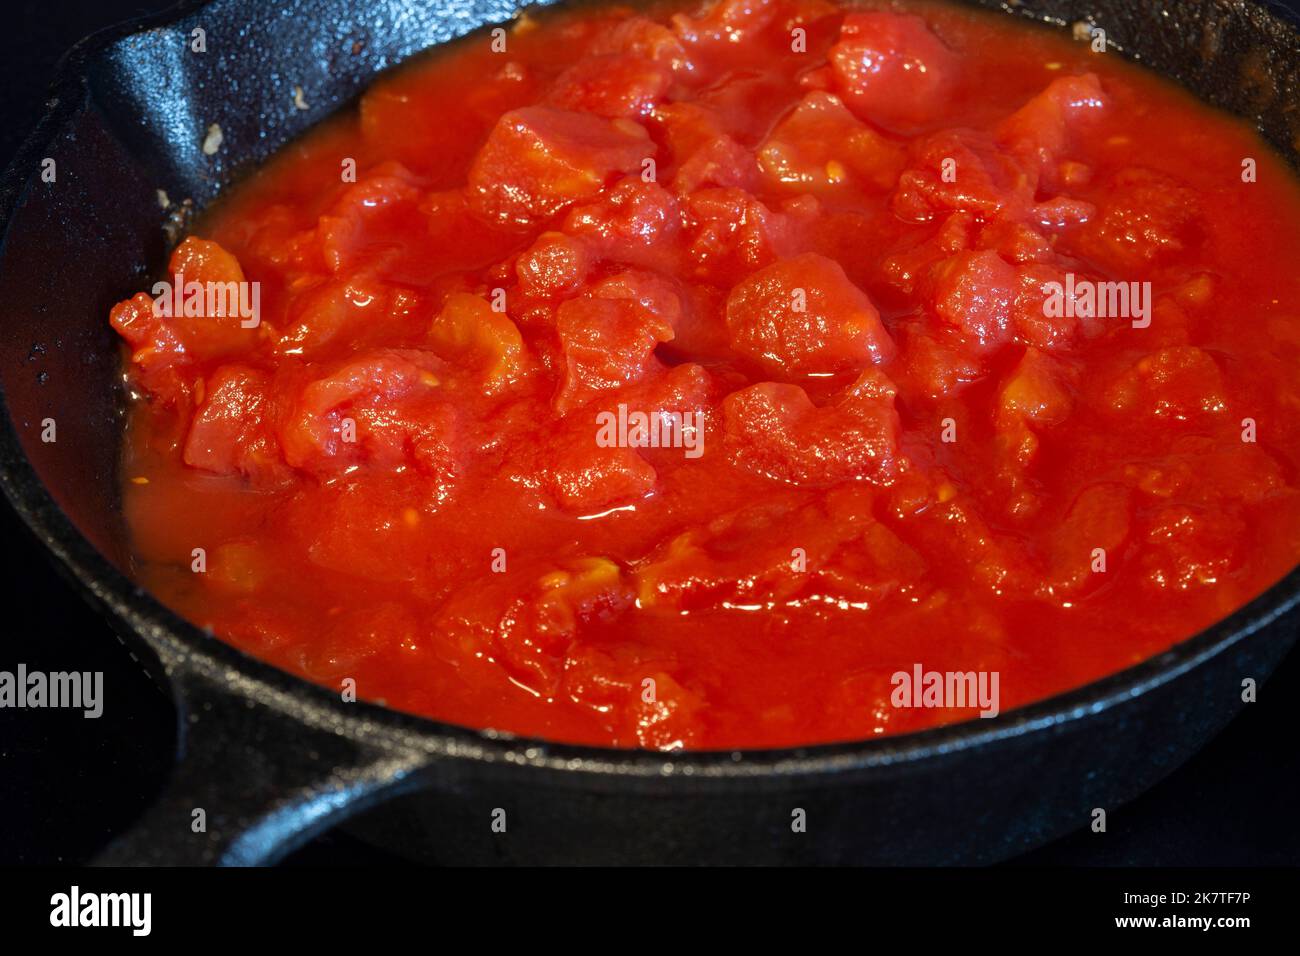 Cooking chopped tomatoes in a cast iron frying pan, on an electric hob stove Stock Photo